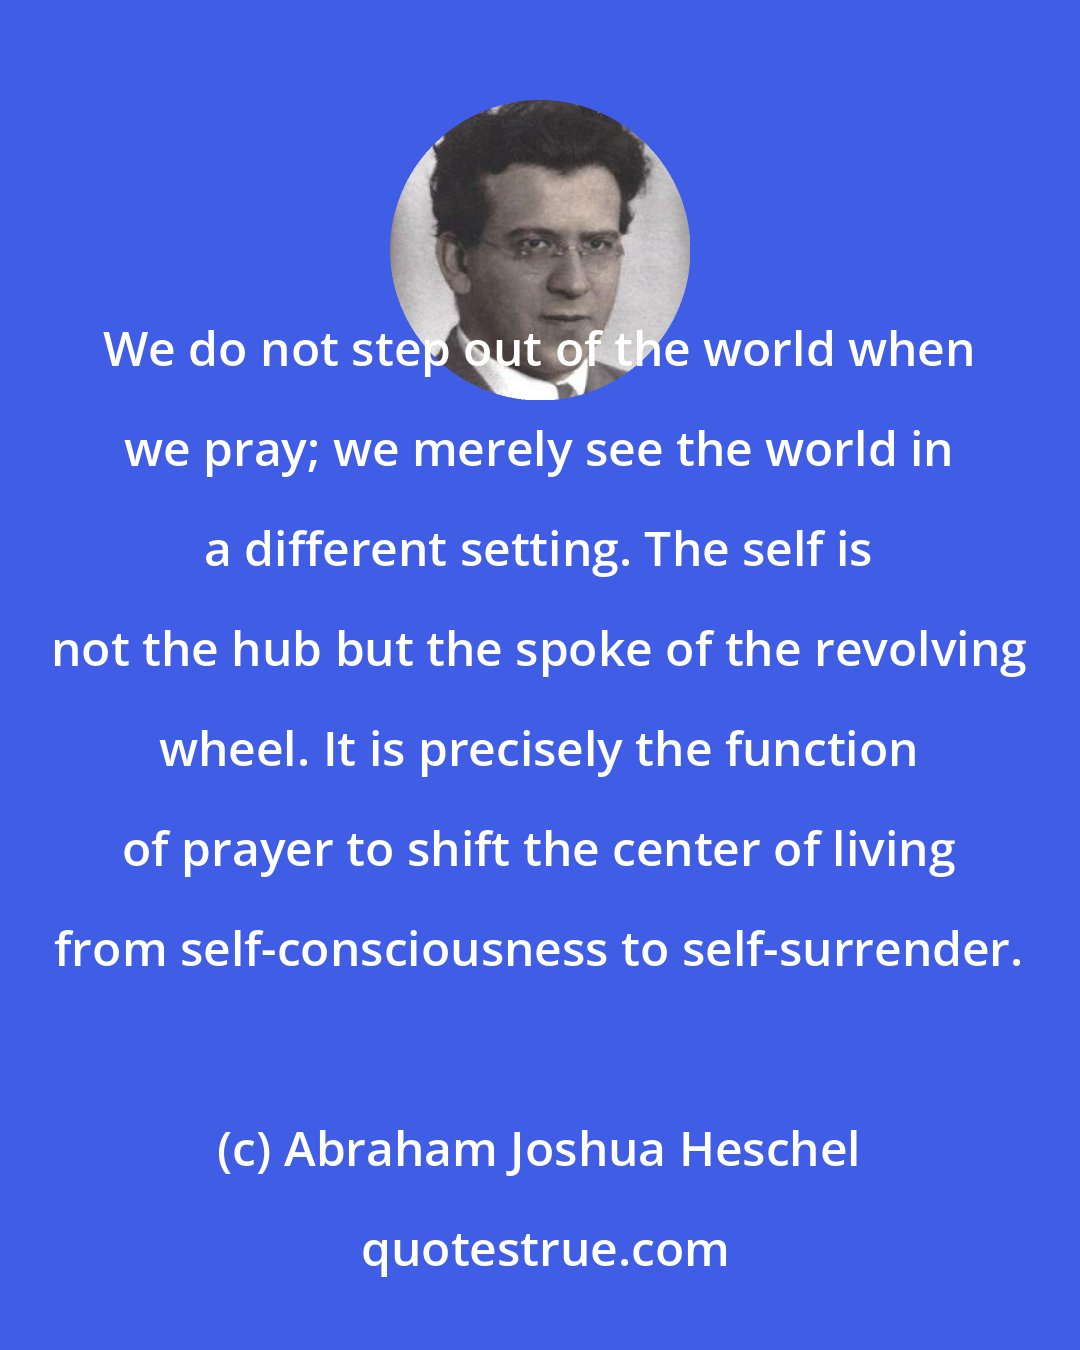 Abraham Joshua Heschel: We do not step out of the world when we pray; we merely see the world in a different setting. The self is not the hub but the spoke of the revolving wheel. It is precisely the function of prayer to shift the center of living from self-consciousness to self-surrender.